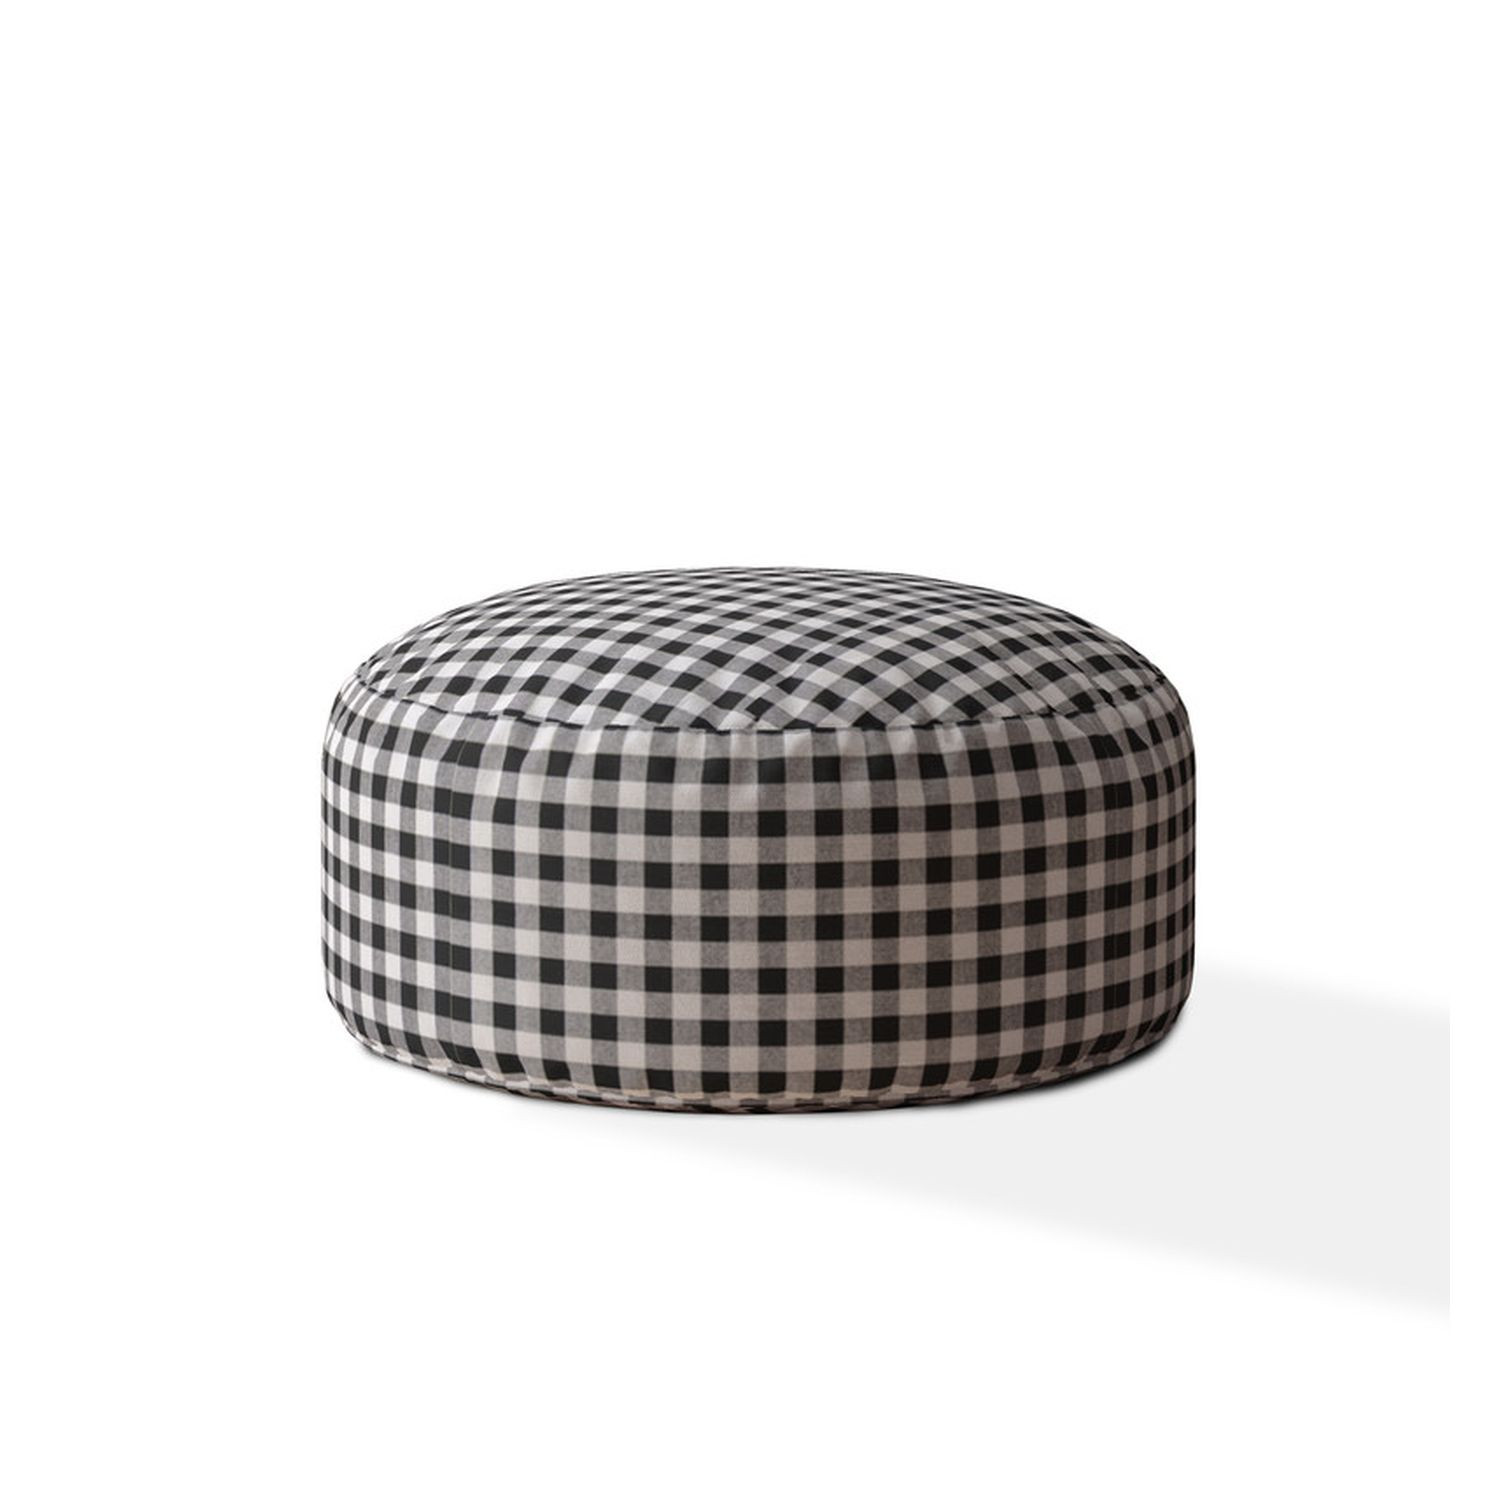 24" Gray And Black Cotton Round Gingham Pouf Ottoman-518330-1